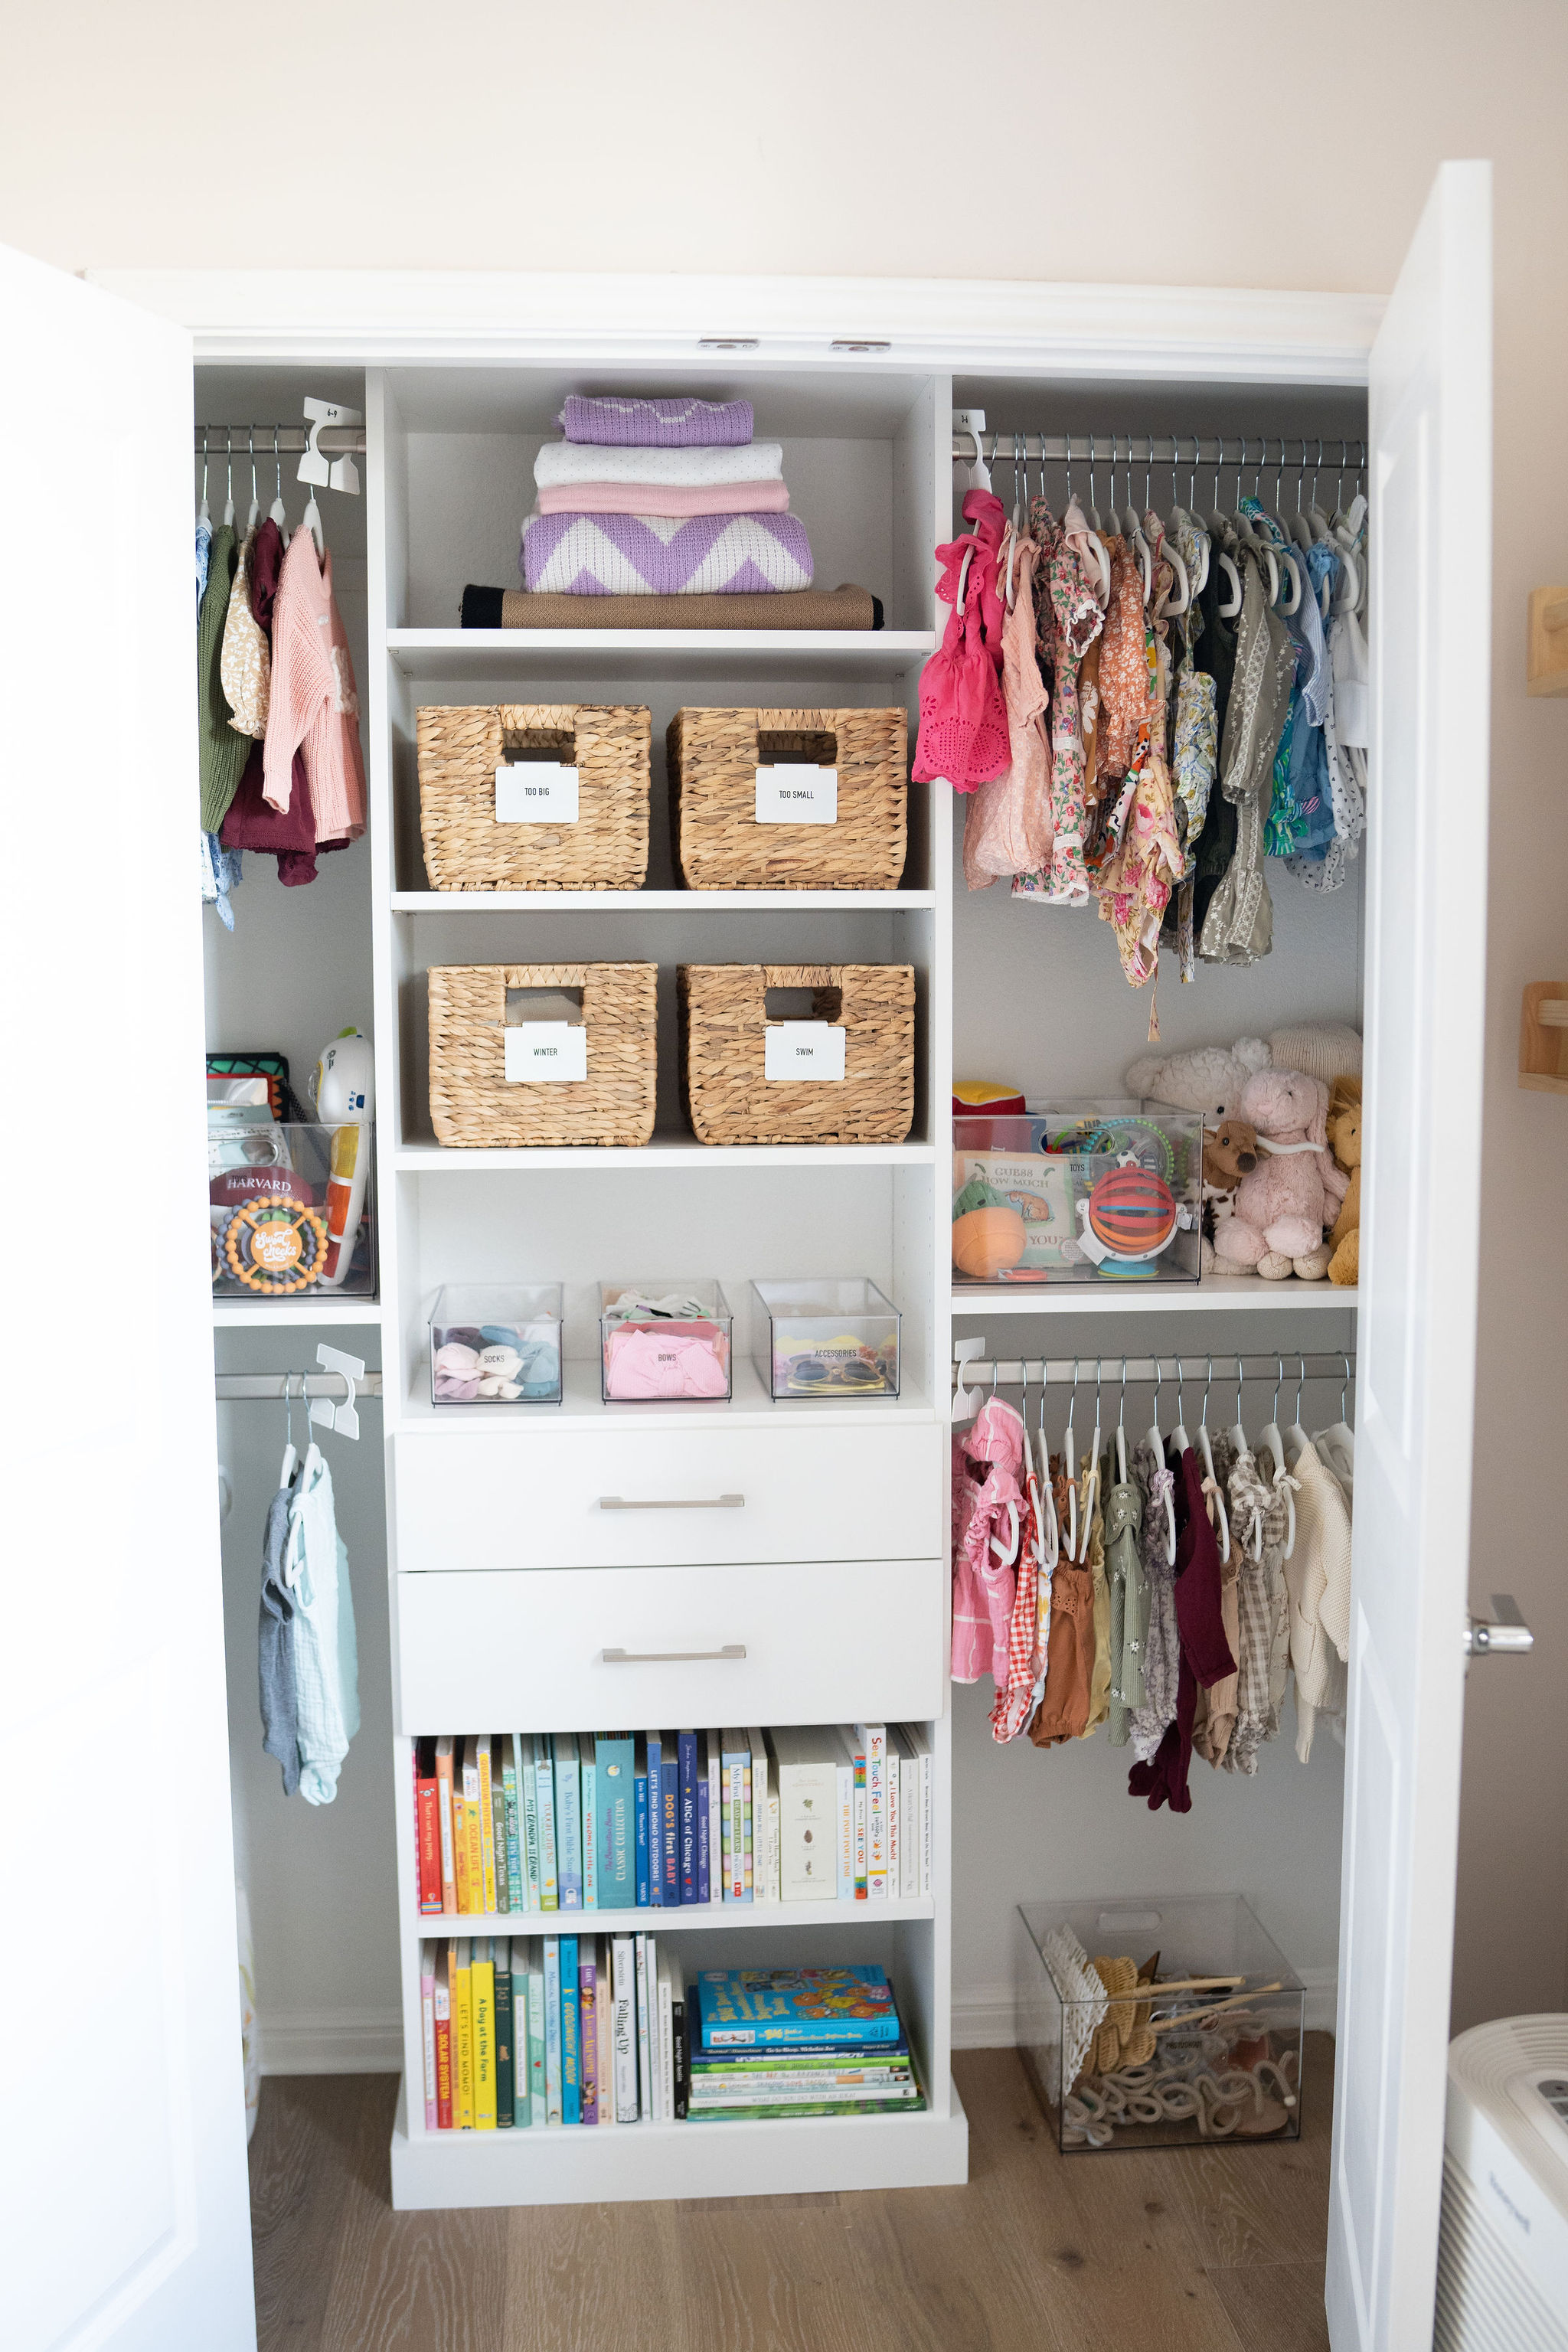 MY DREAM CLOSET TOUR! ULTIMATE CLOSET ORGANIZATION IDEAS! BEFORE AND AFTER